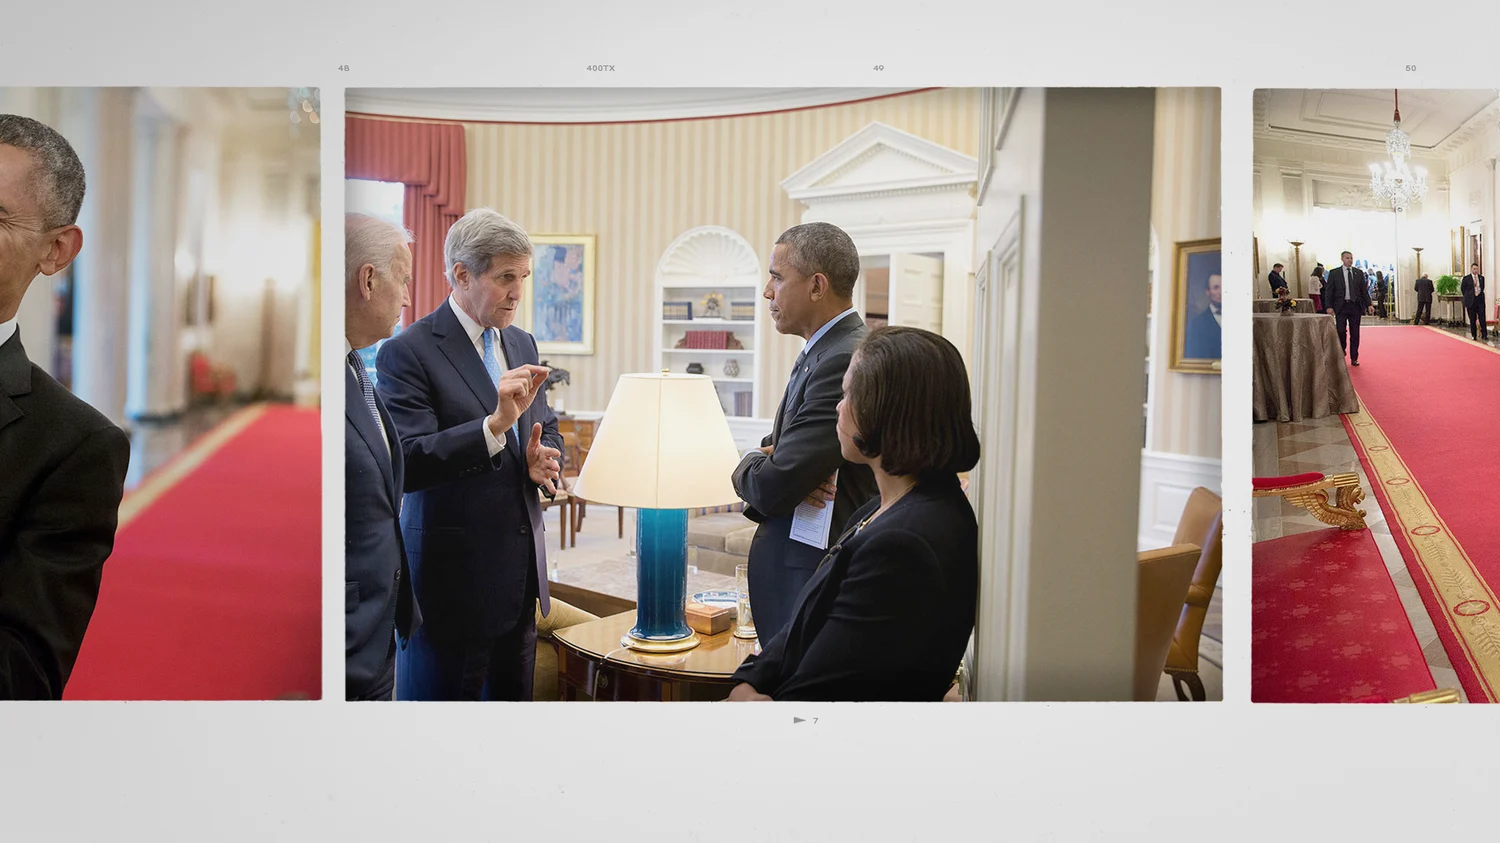 Pete Souza’s legendary career as a photographer is the focus of the documentary, The Way I See It. We designed a graphics package to help chronicle his photographic perspective of his career as the official White House Photographer for two presidencies and his legacy. 